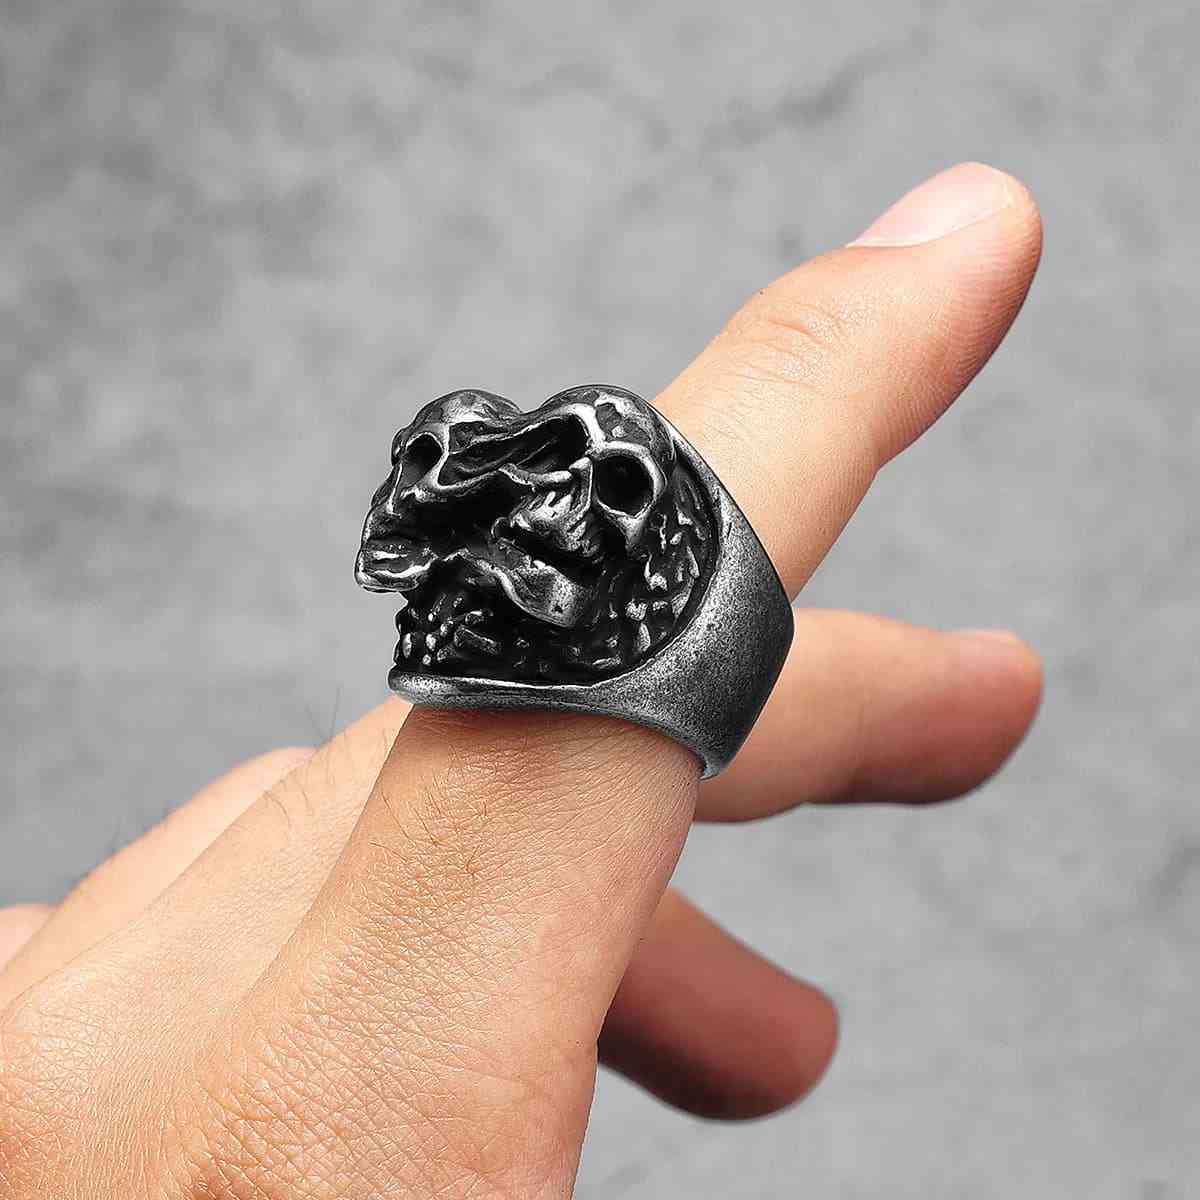 Double Headed Skull Ring Stainless Steel Xenos Jewelry